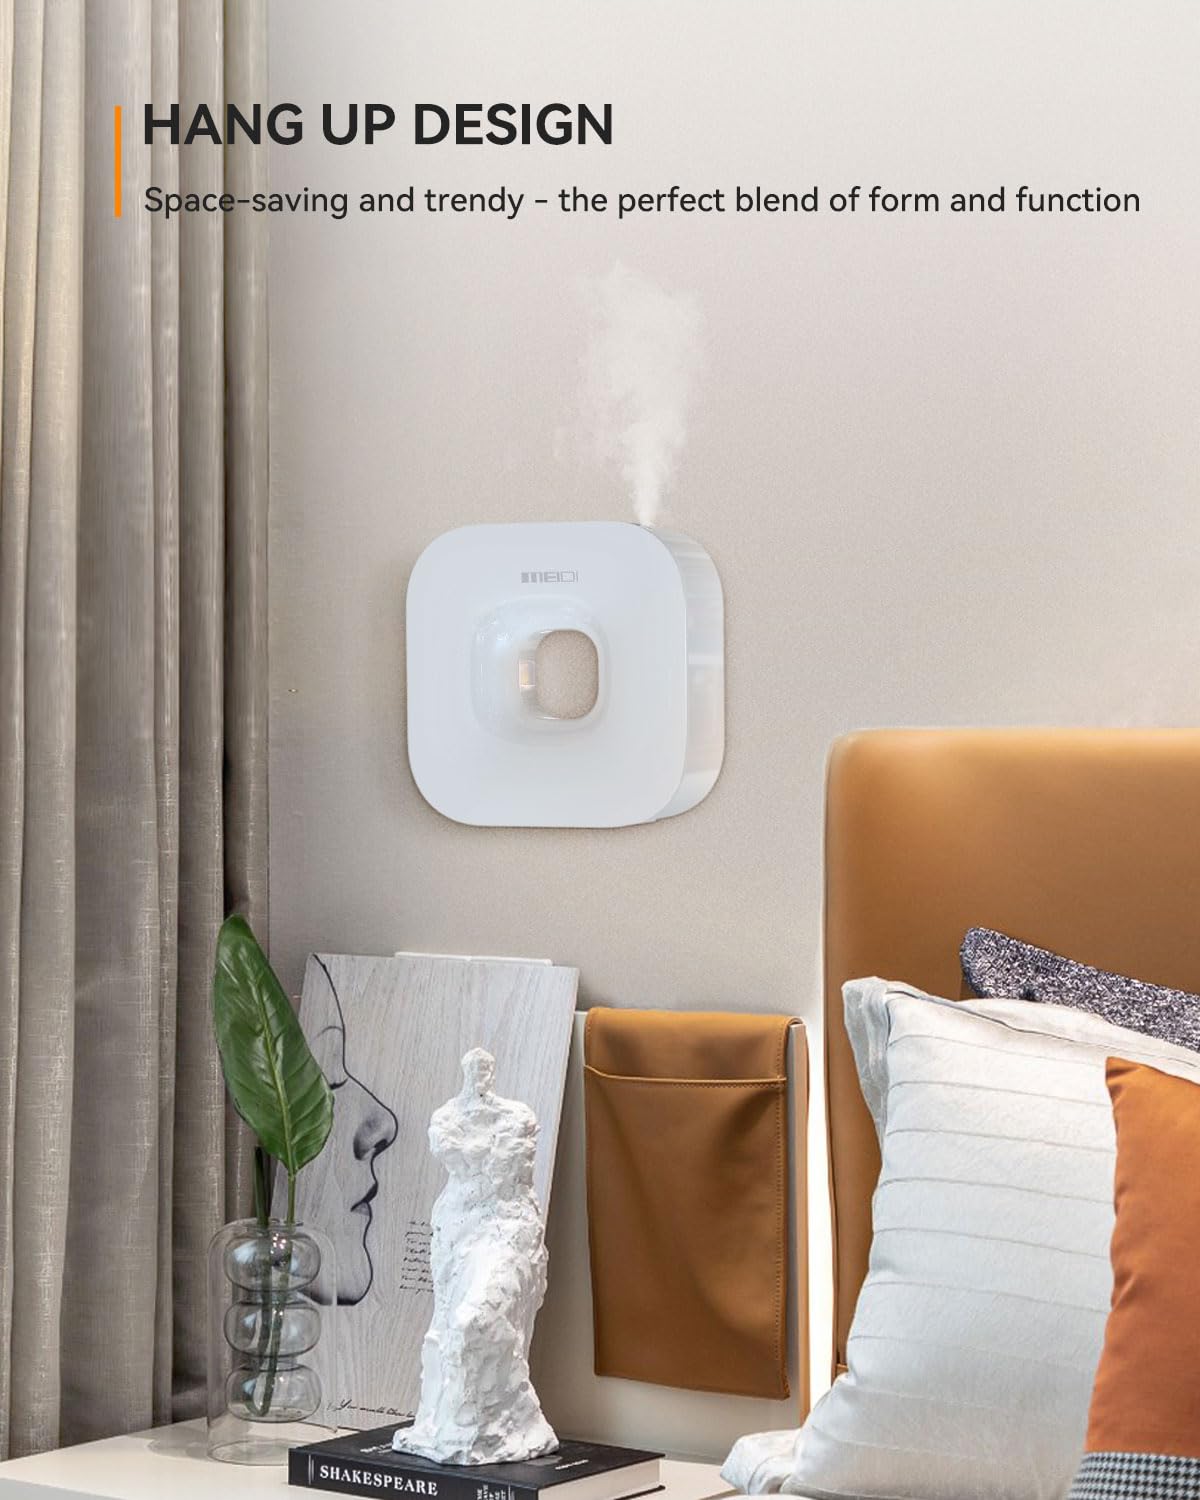 MEIDI Waterless Essential Oil Diffuser - Bluetooth Cordless Aromatherapy Diffuser with App Control, Smart Timer Setting, Hang-up Design and Wide Coverage for Home, Office, Hotel and SPA - White